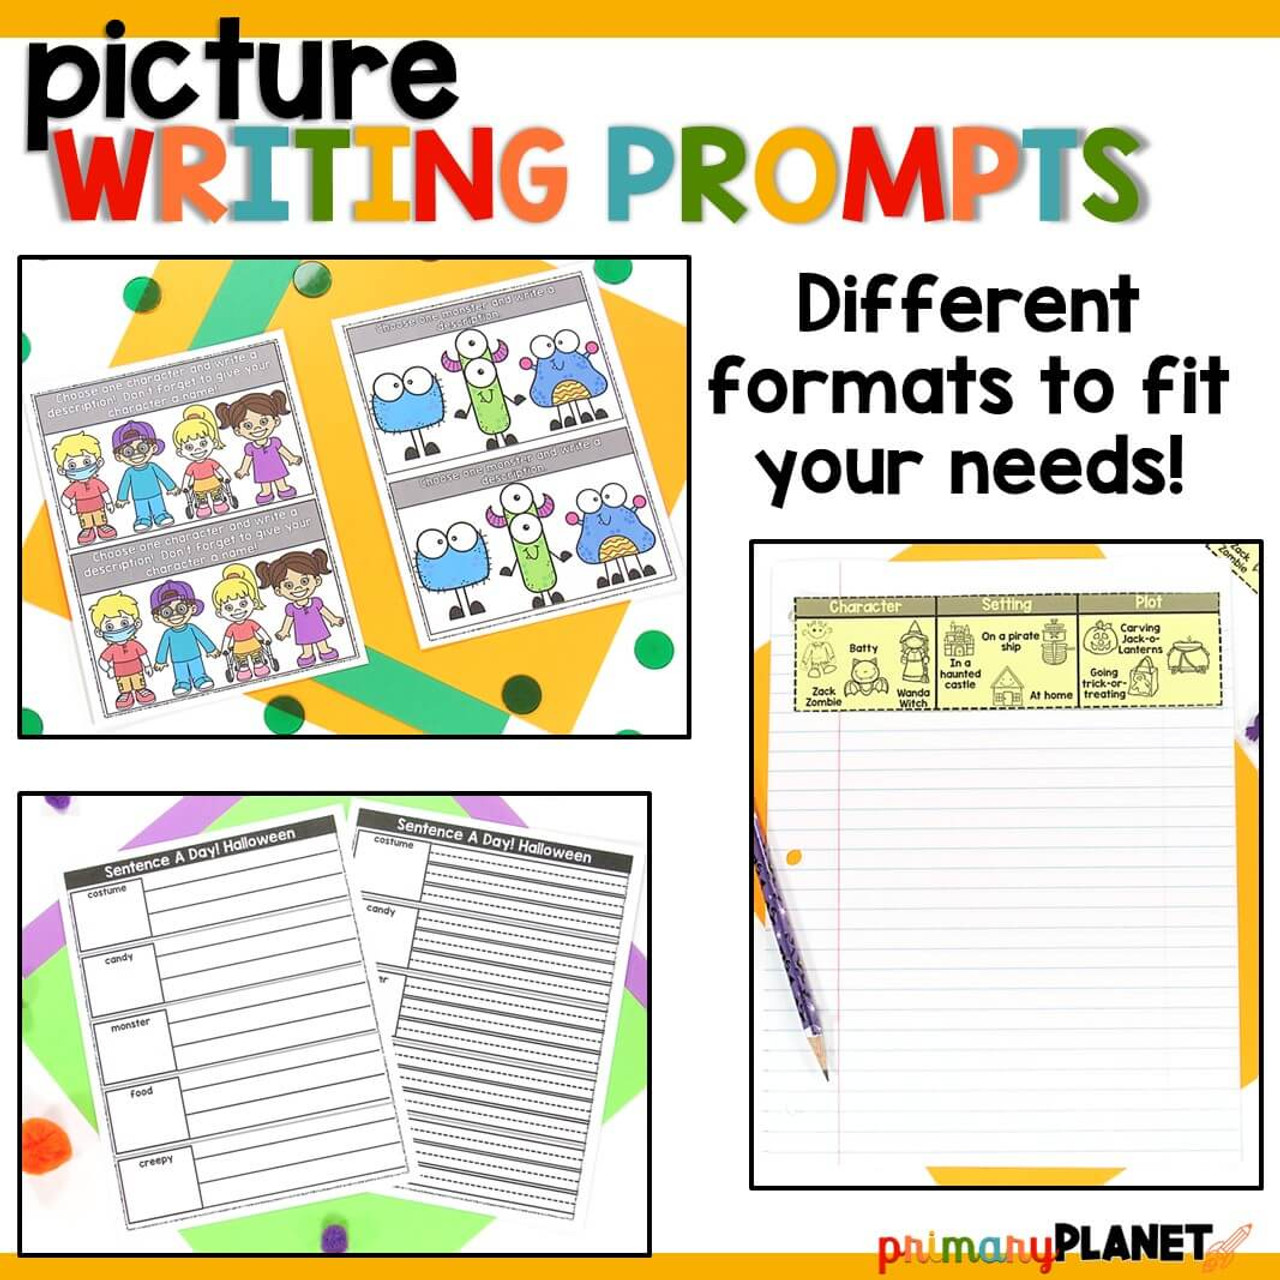 October Writing Prompts with Picture Choices - Pick a Prompts